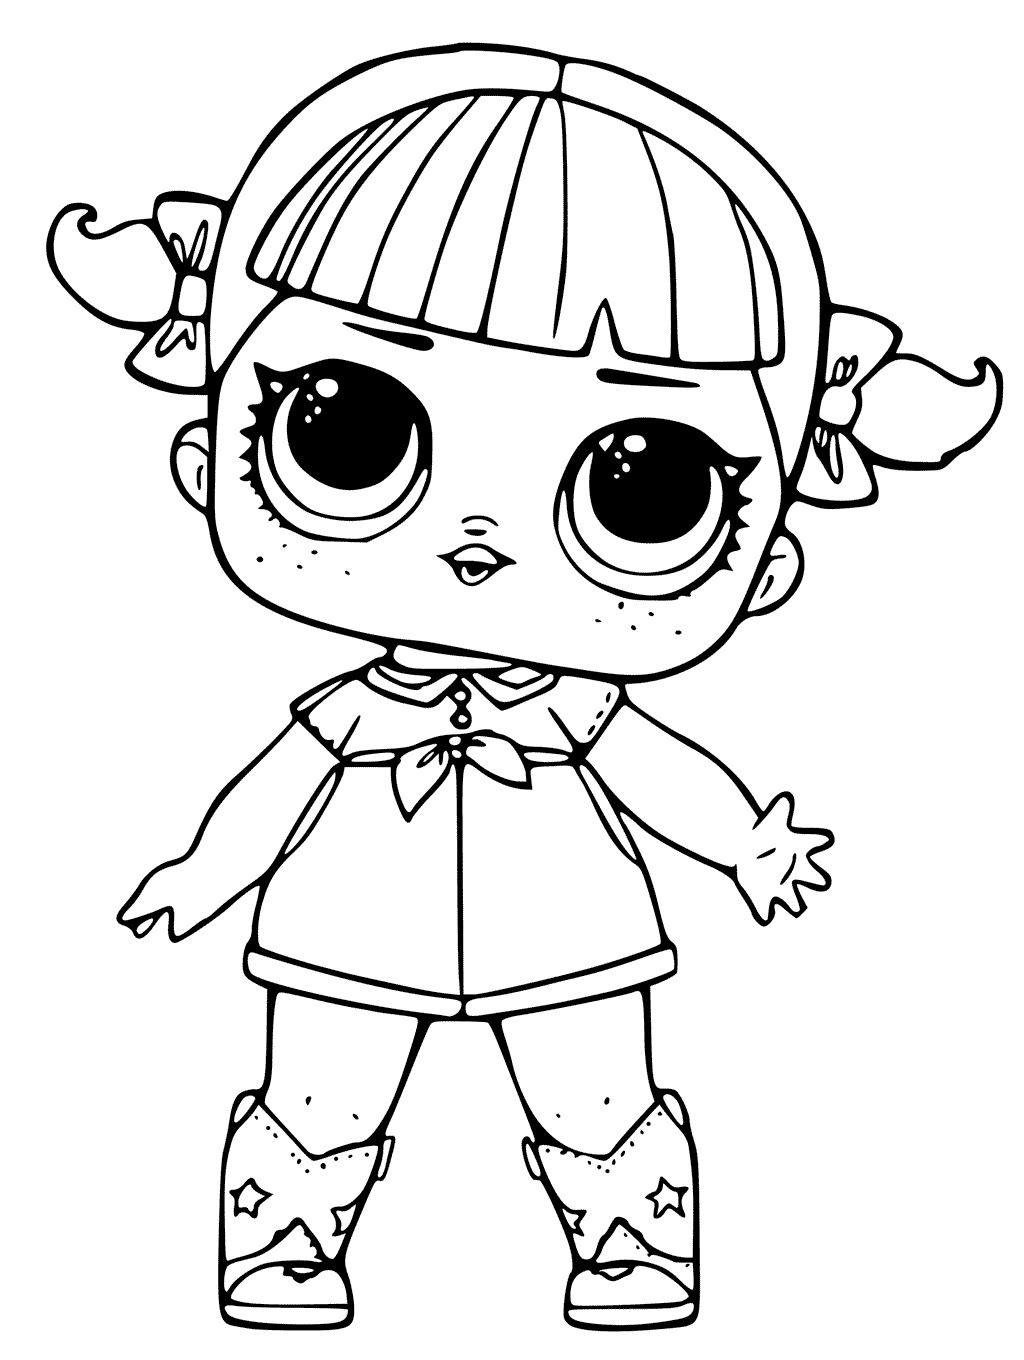 LOL Surprise Dolls Coloring Pages   Coloring Cool